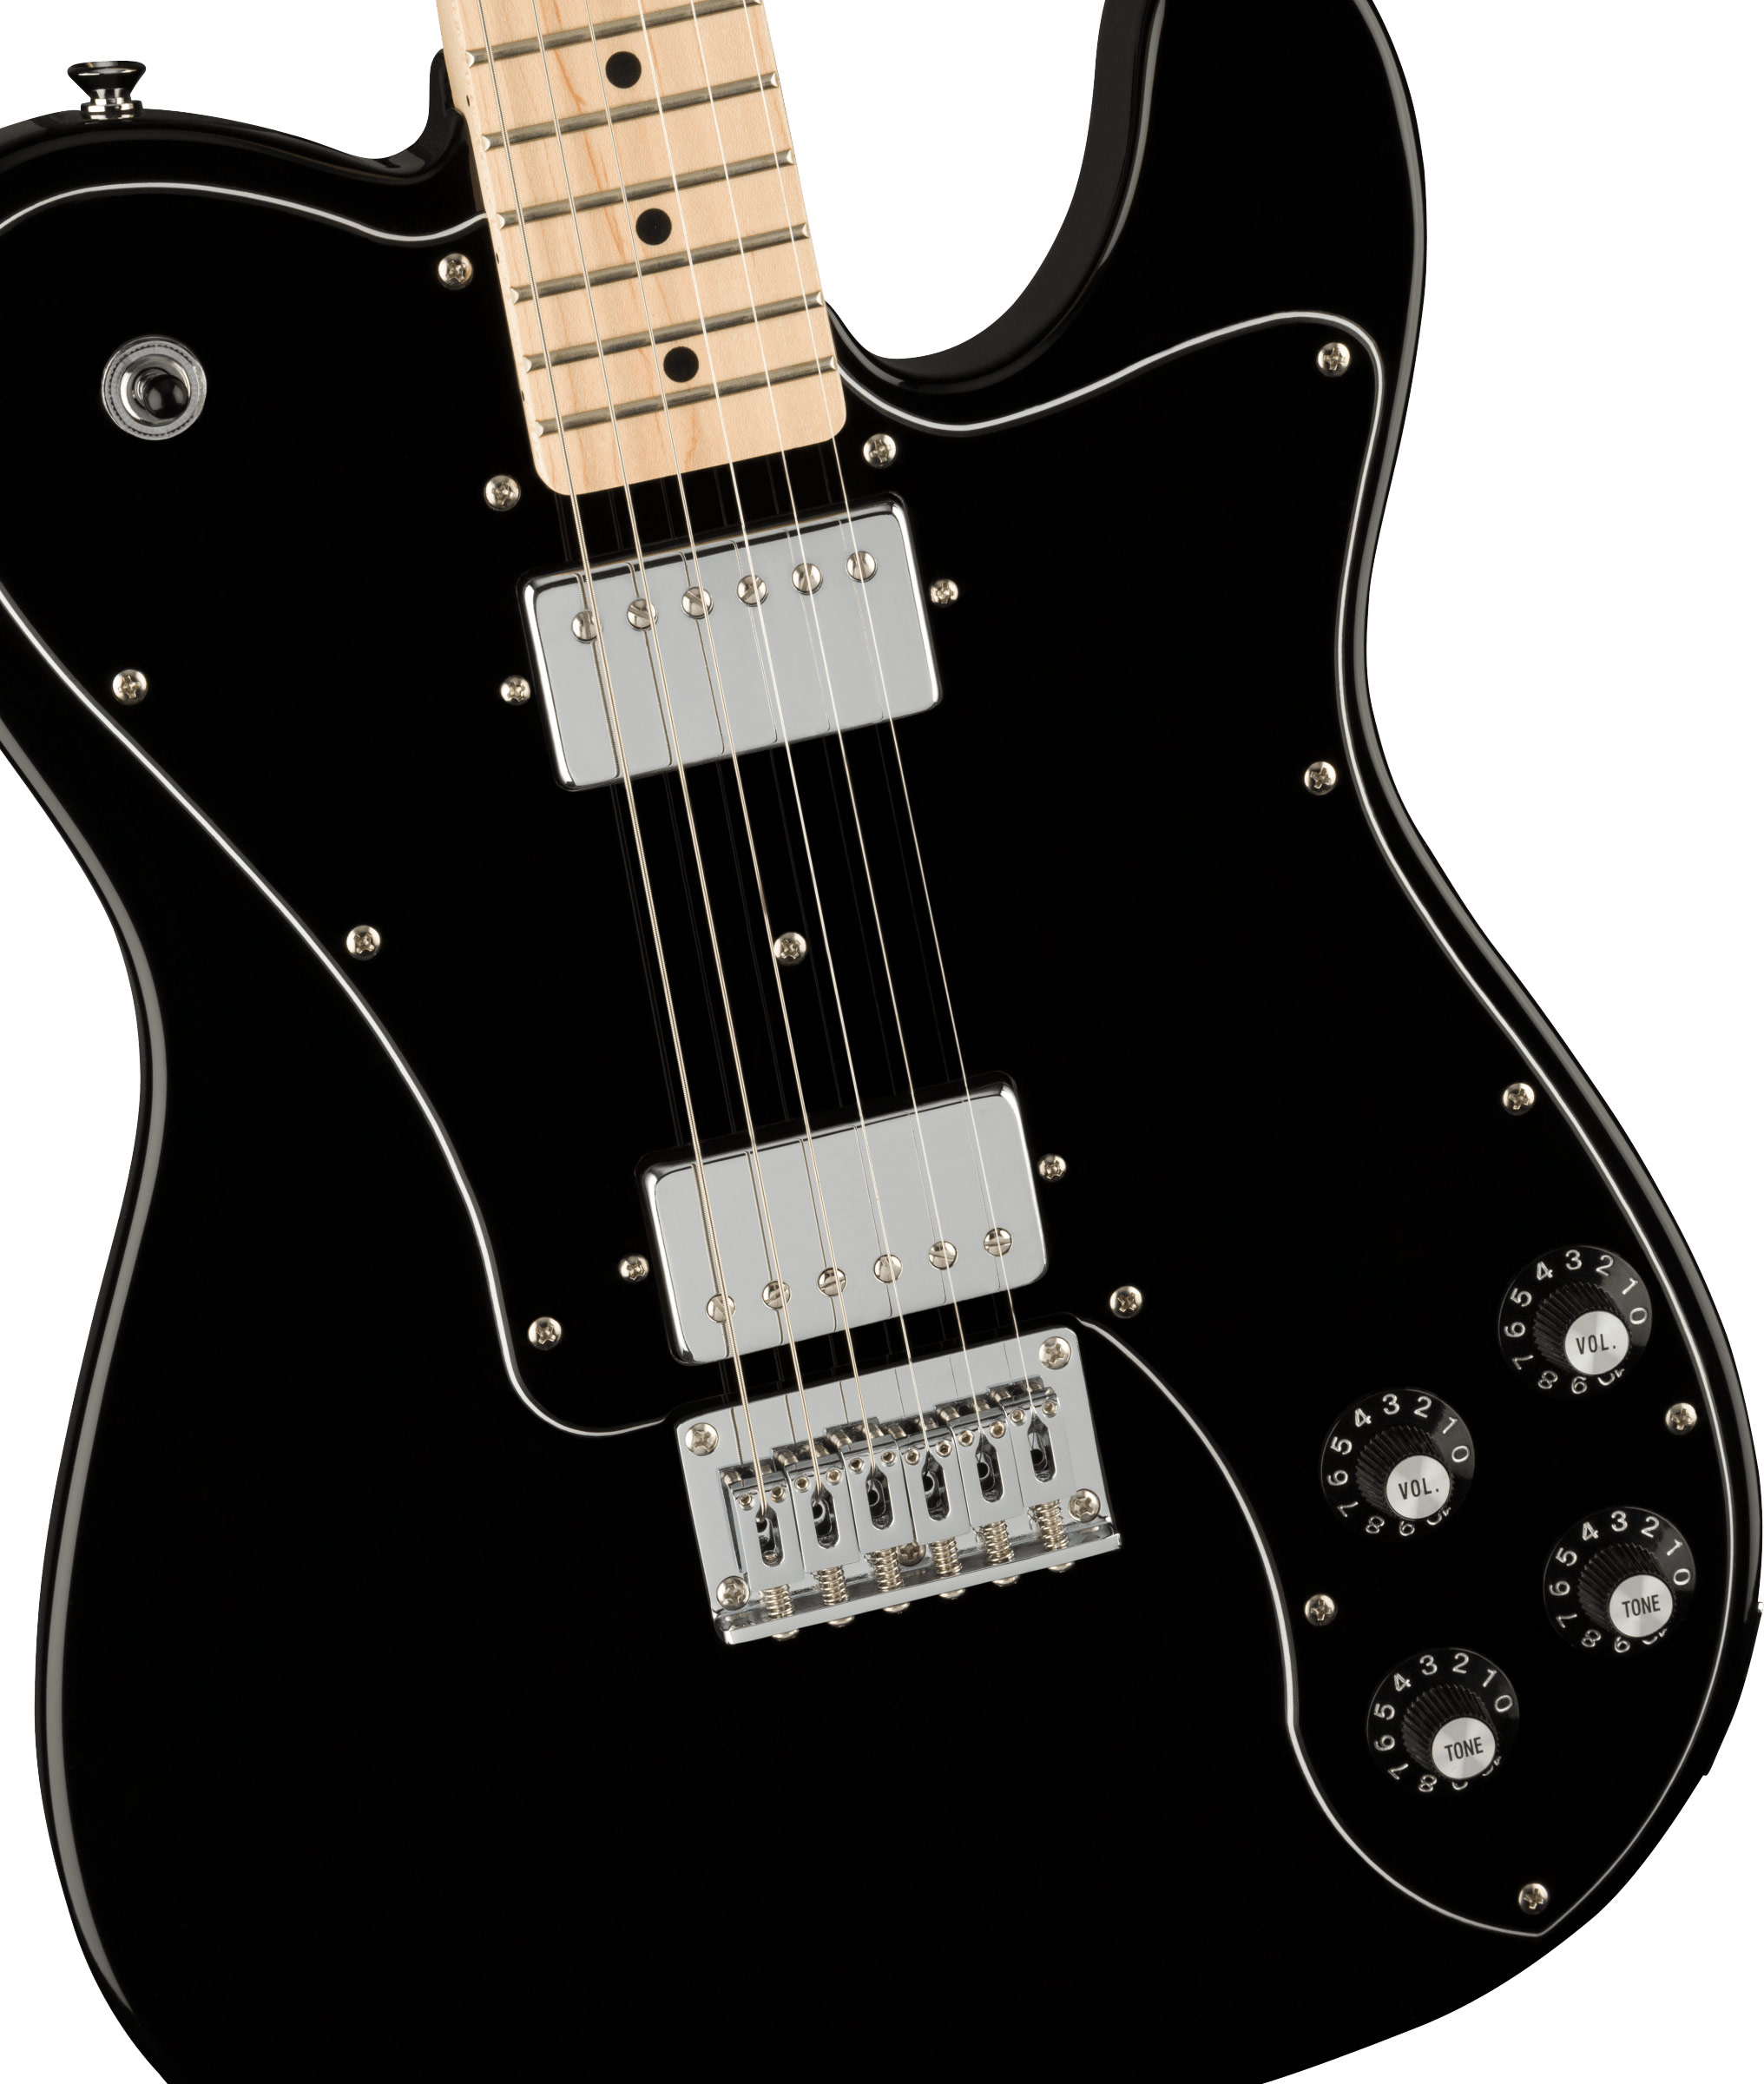 Squier Affinity Telecaster Deluxe Black Maple Fingerboard